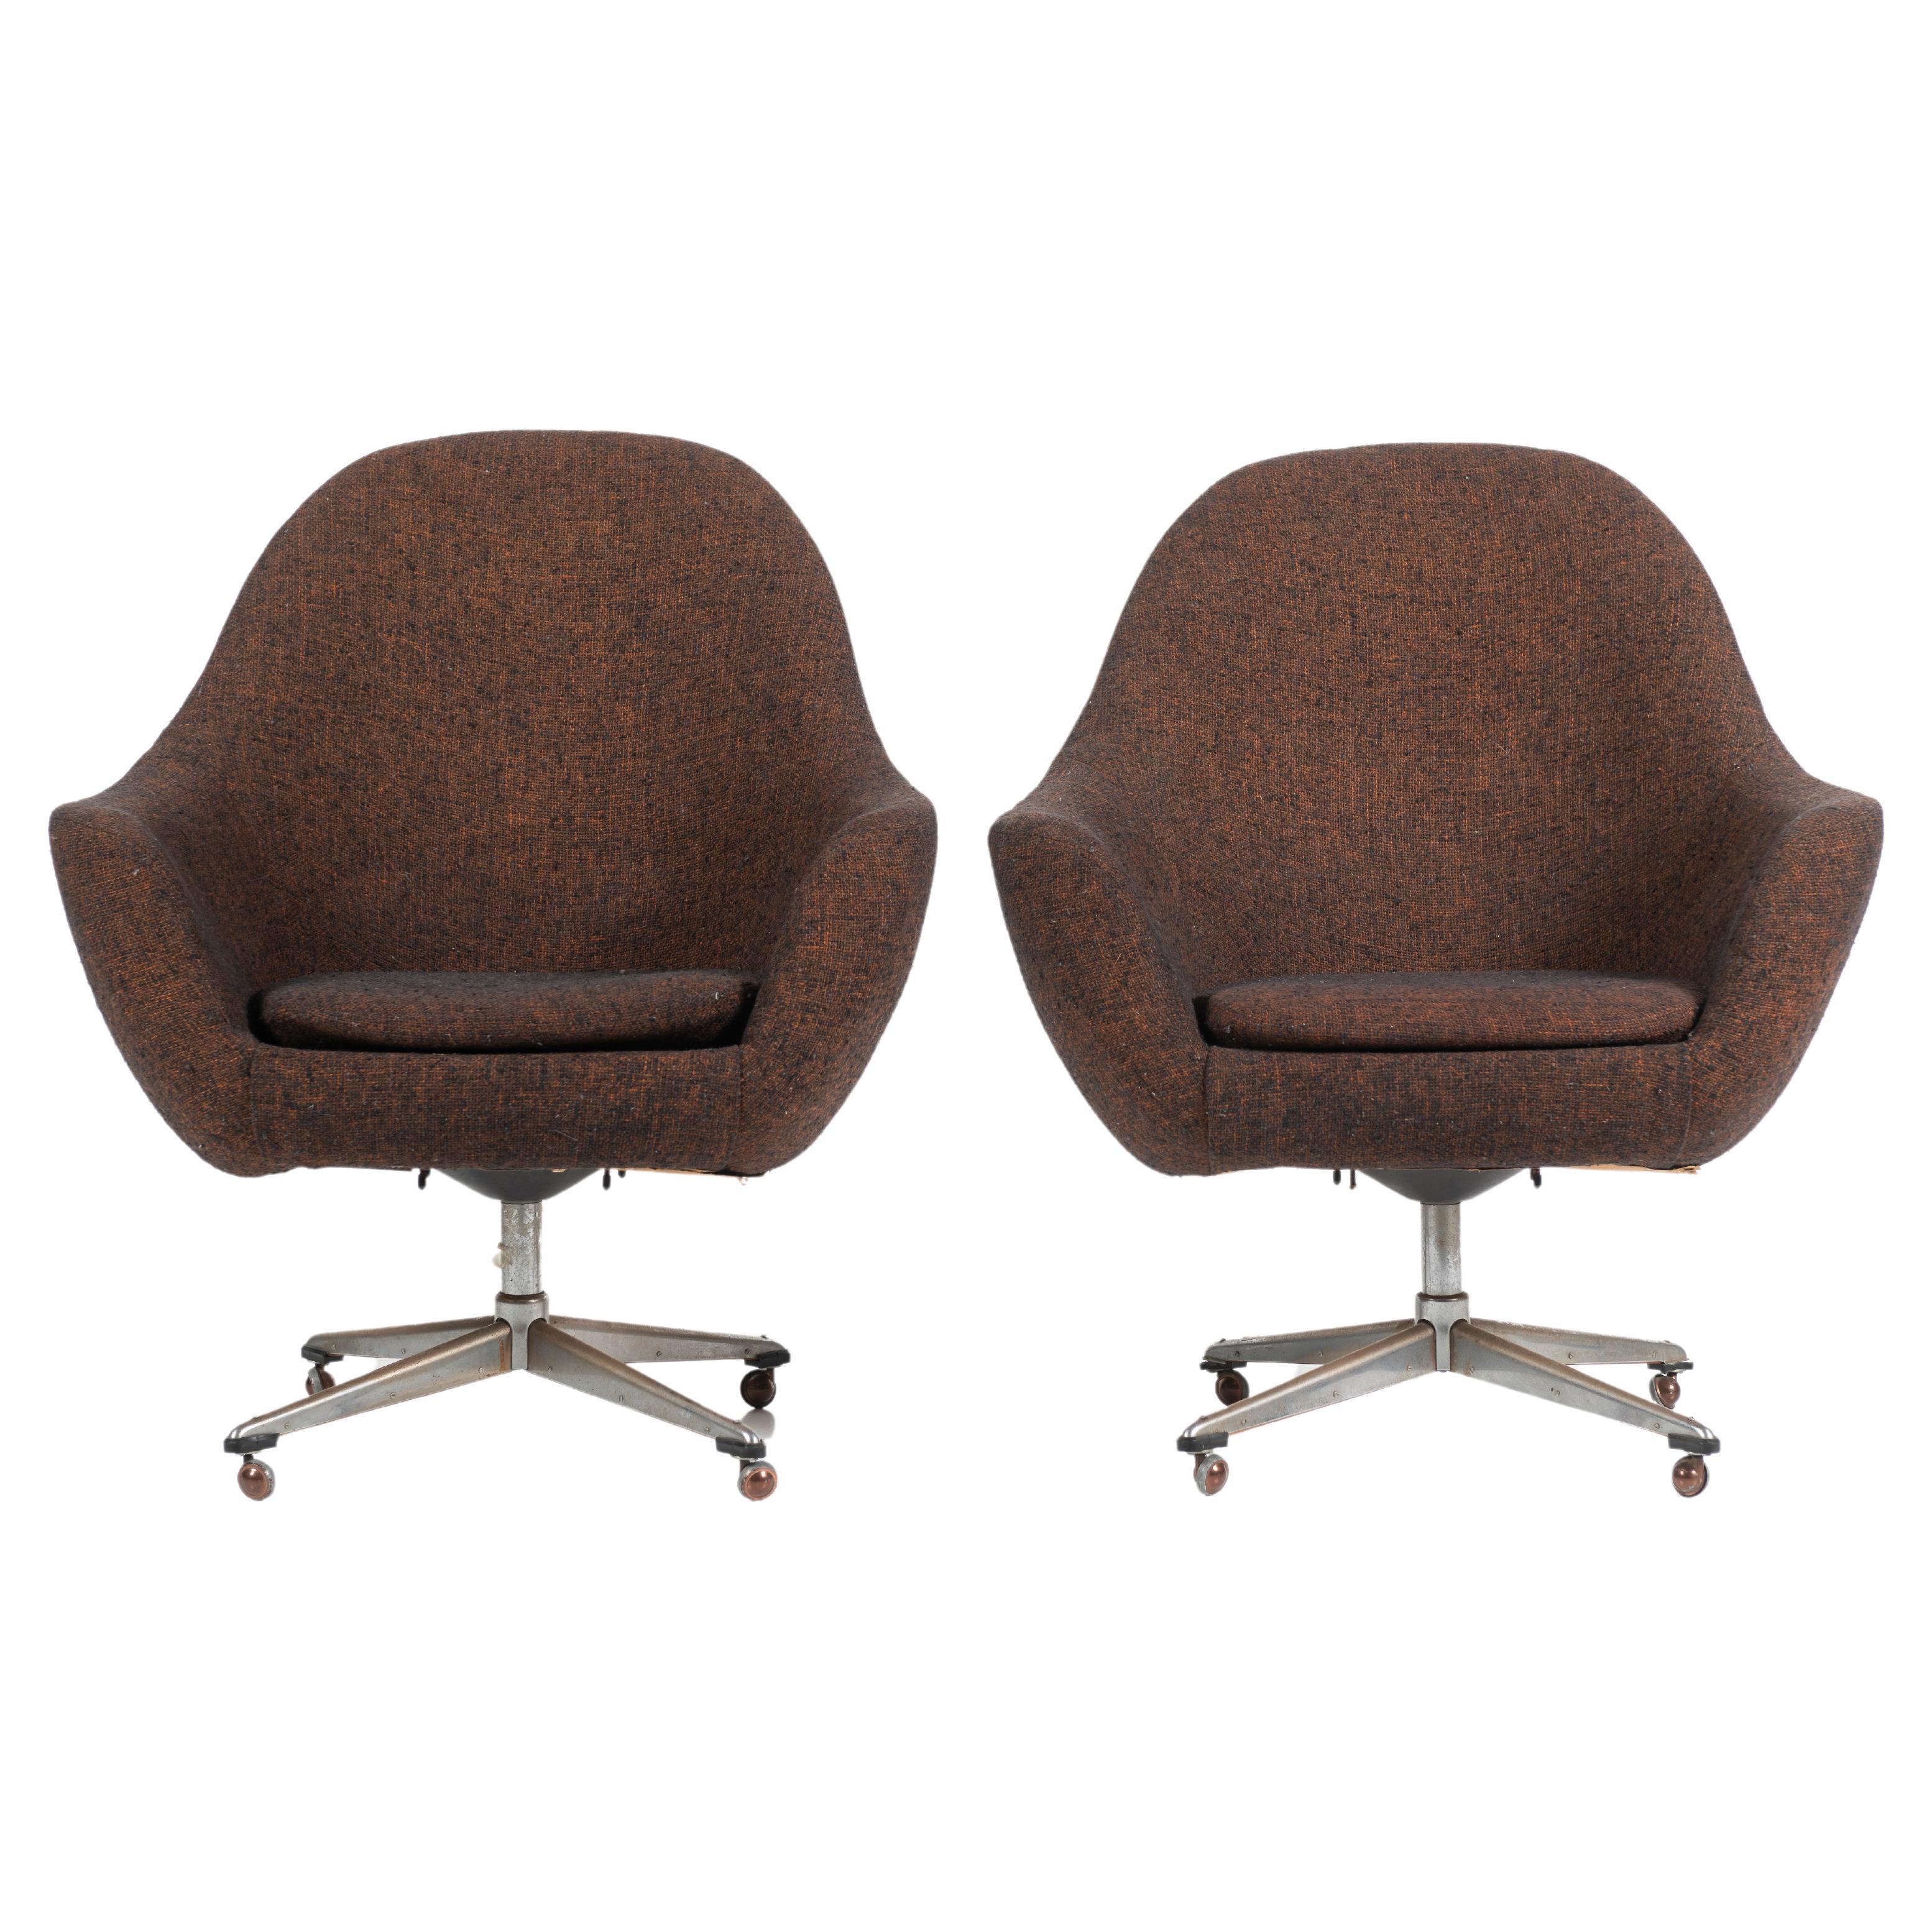 Pair of Mid-Century Modern Wool Overman Swivel Chairs, with Casters, Sweden 1960 For Sale